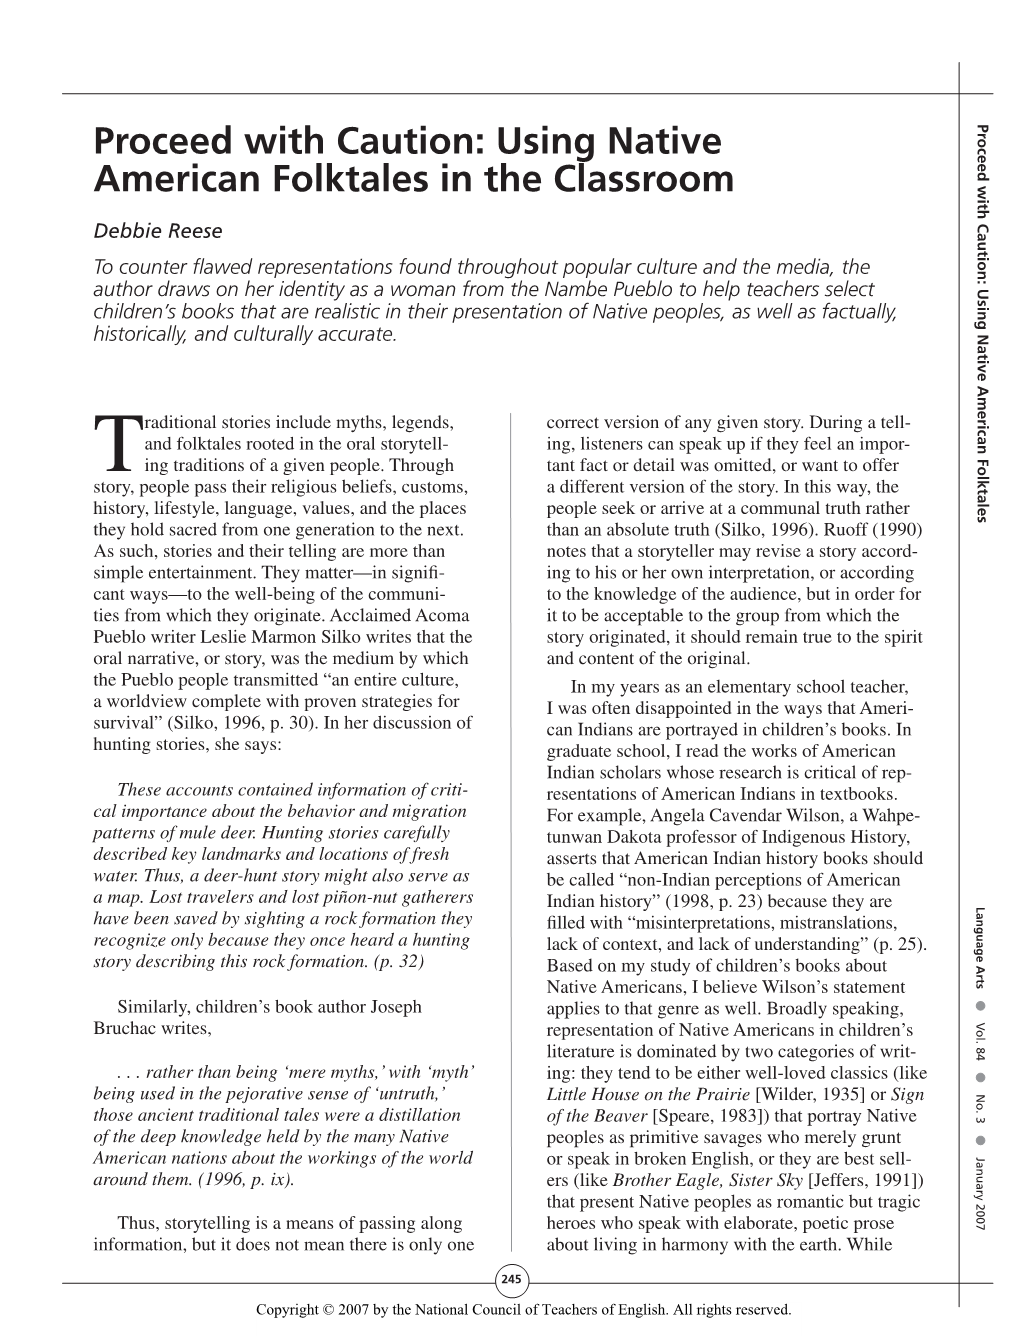 Proceed with Caution: Using Native American Folktales in the Classroom